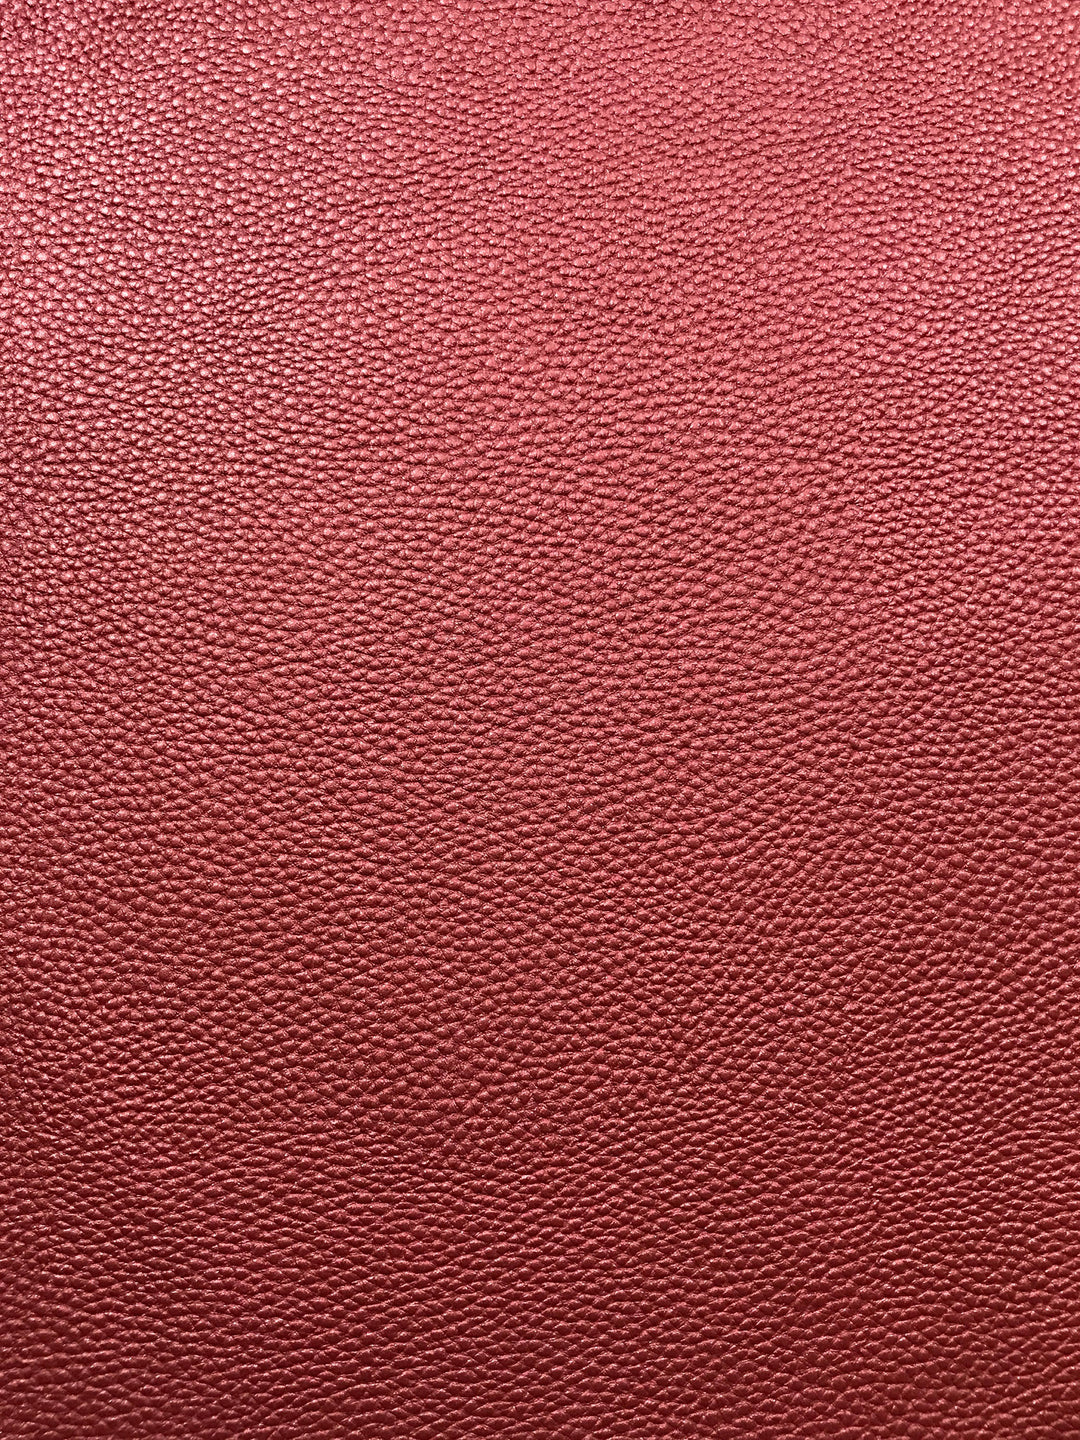 Pearl Burgundy Leatherette Sheet 1.0mm Thickness A4 or A5 Size Faux Leather Fabric